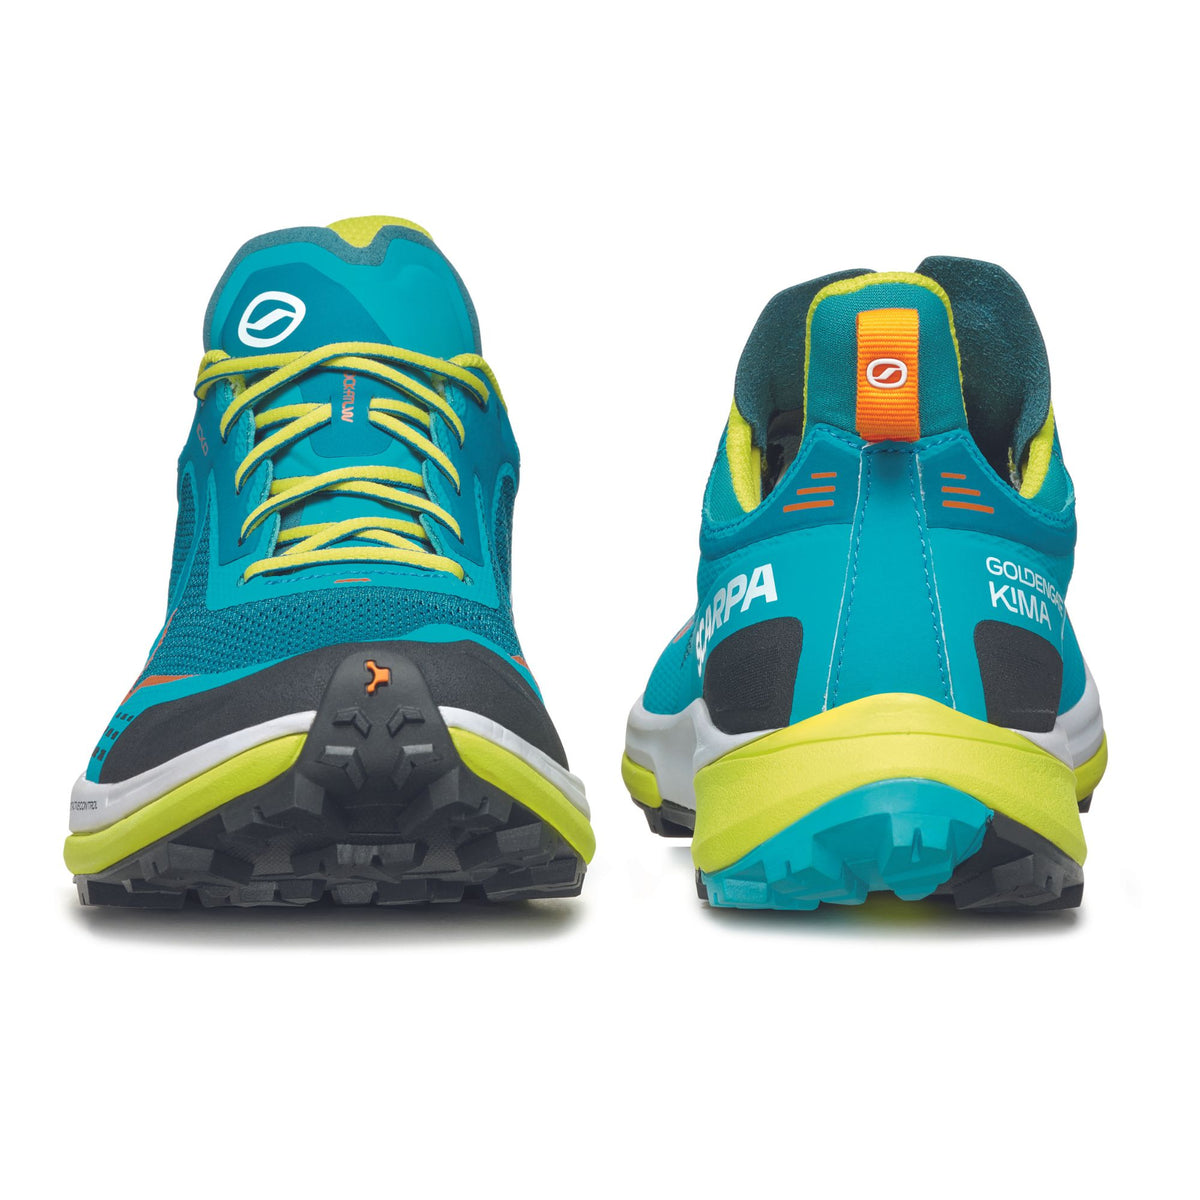 Scarpa Golden Gate Kima RT Front and Back